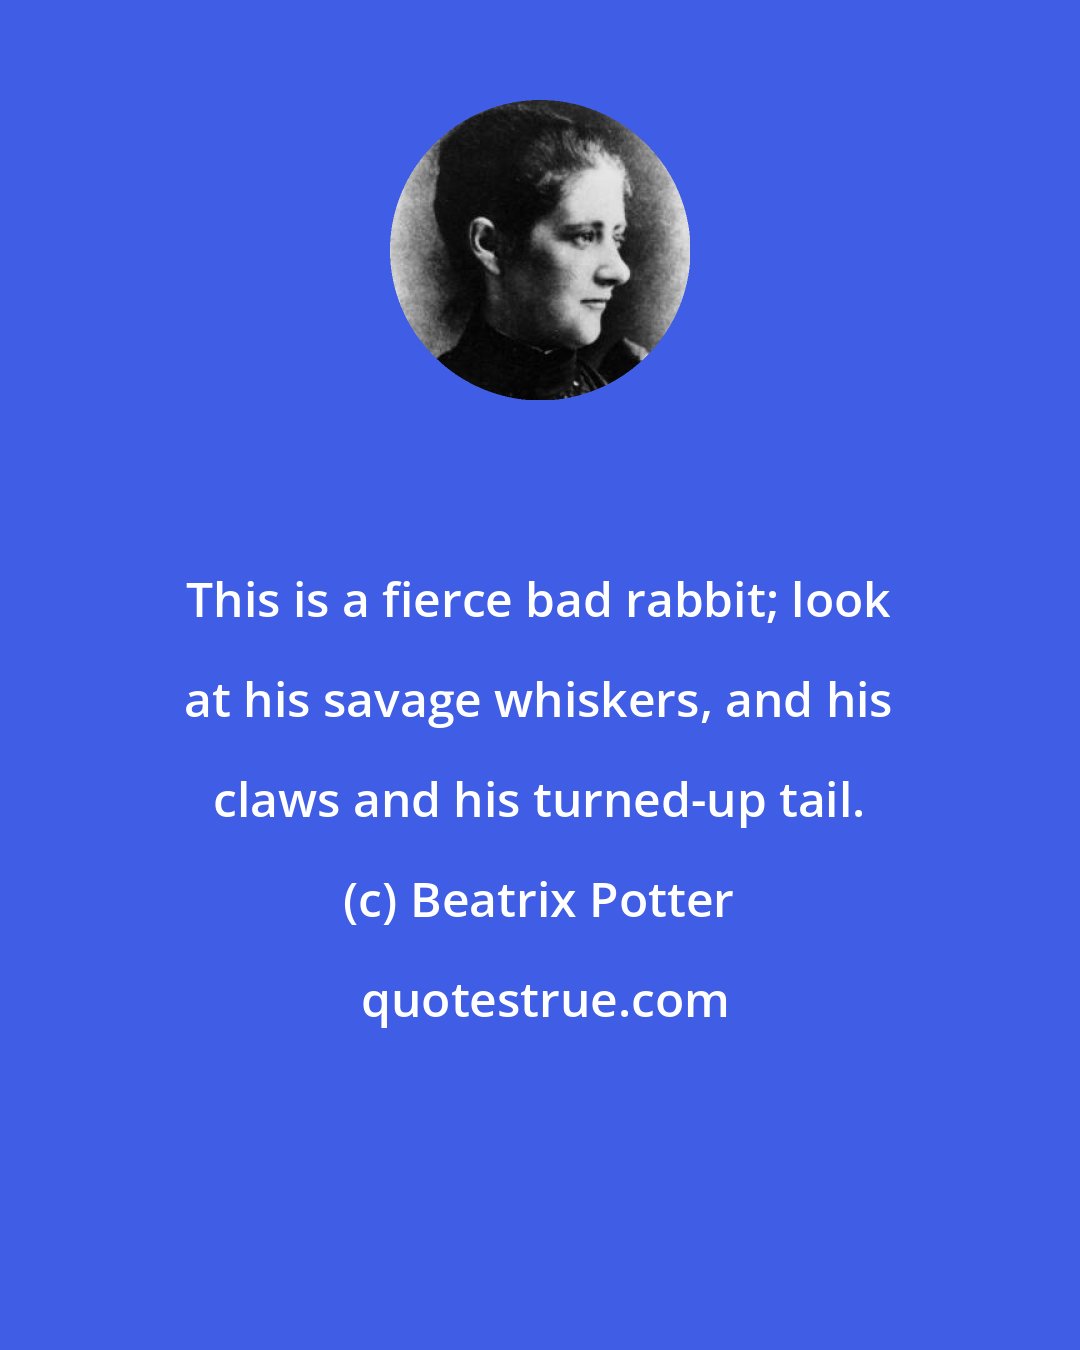 Beatrix Potter: This is a fierce bad rabbit; look at his savage whiskers, and his claws and his turned-up tail.